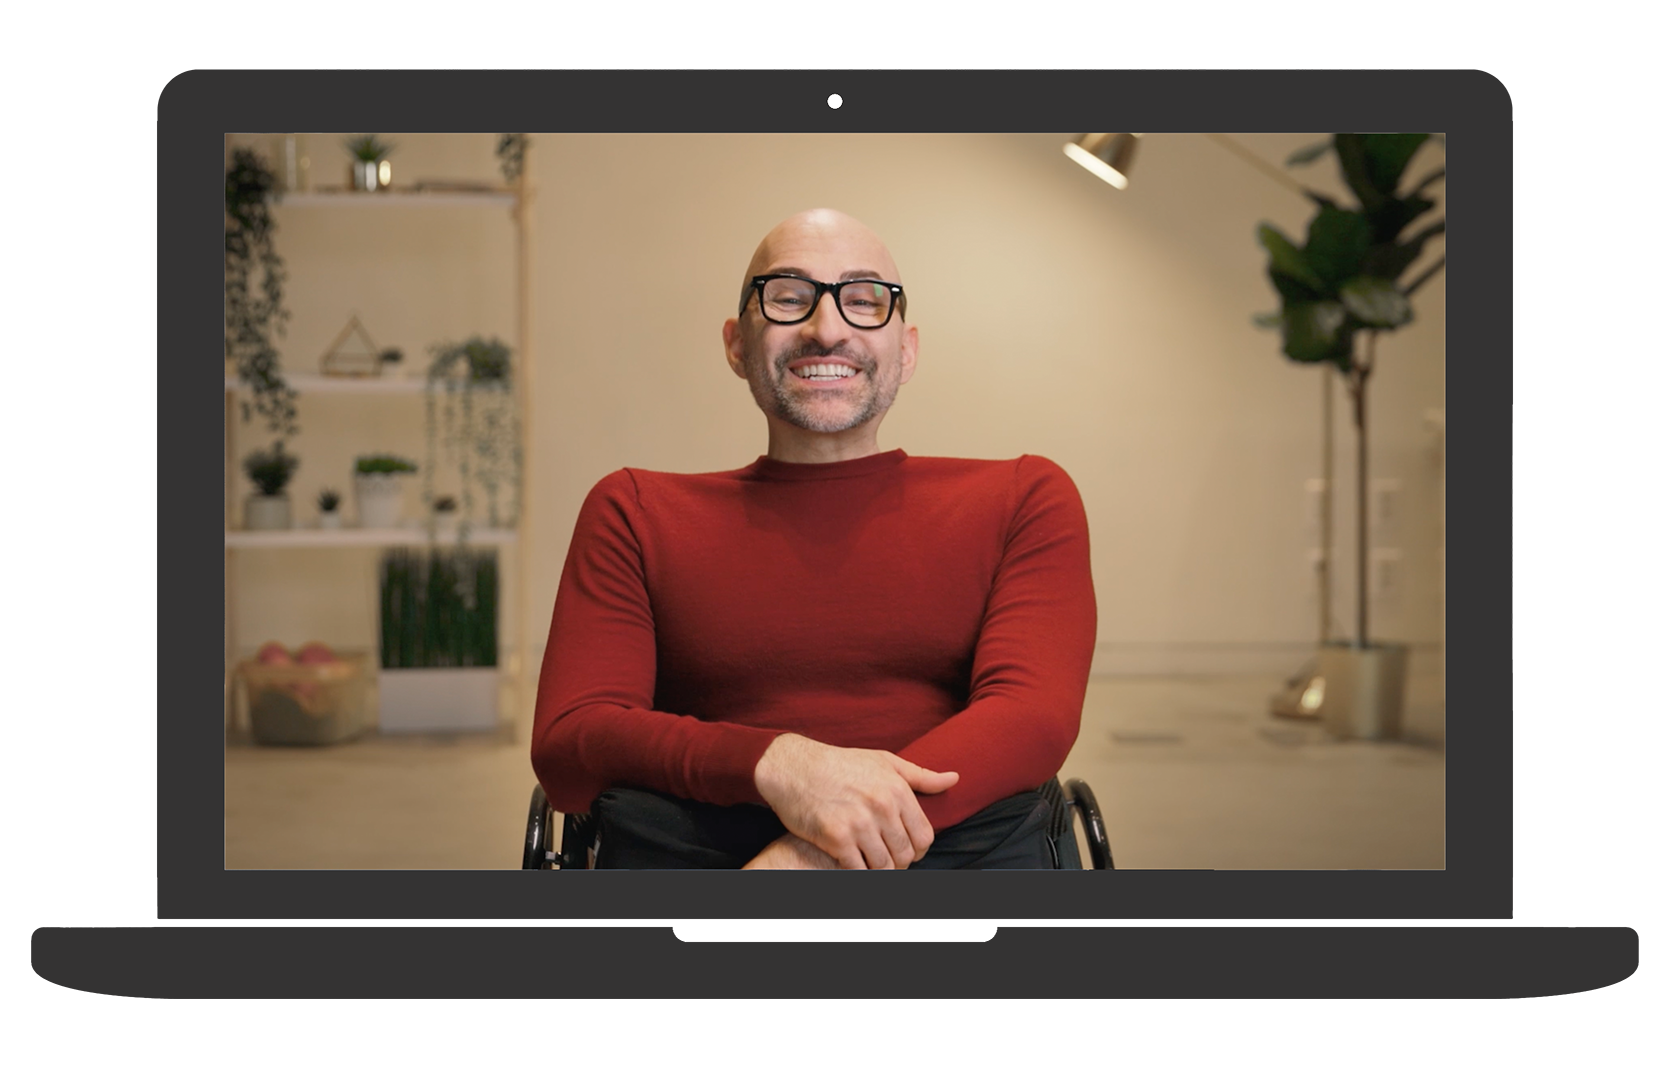 spencer west, a wheelchair user smiles as he appears on a laptop screen